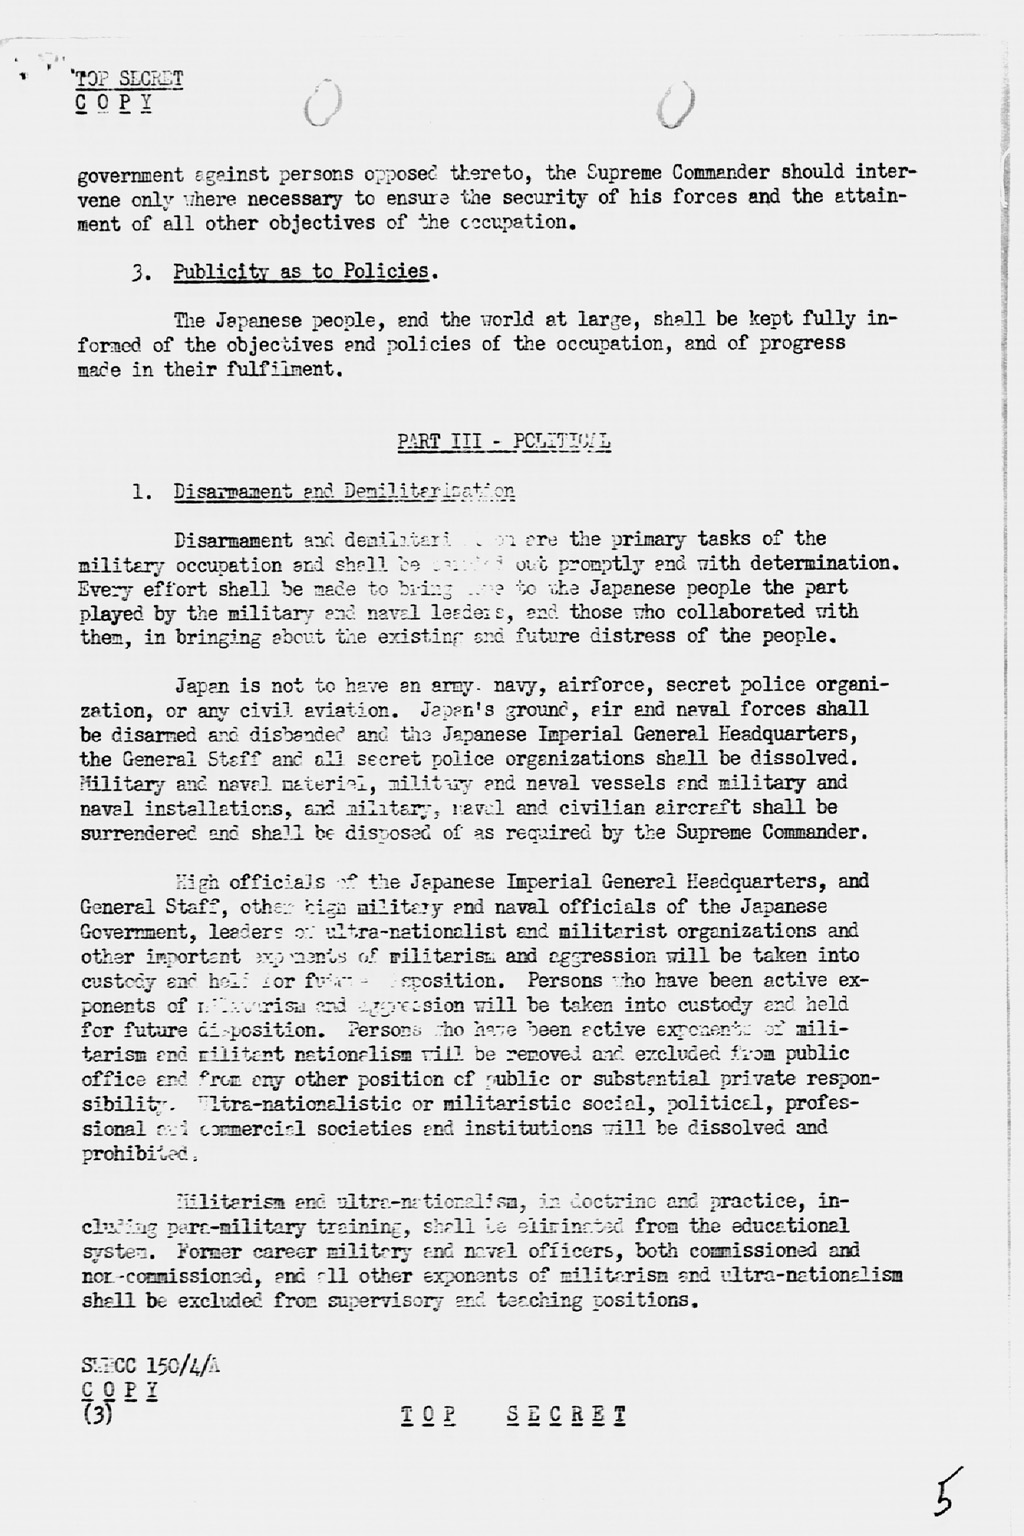 [U.S. Initial Post-Surrender Policy for Japan (SWNCC150/4/A)](Larger image)